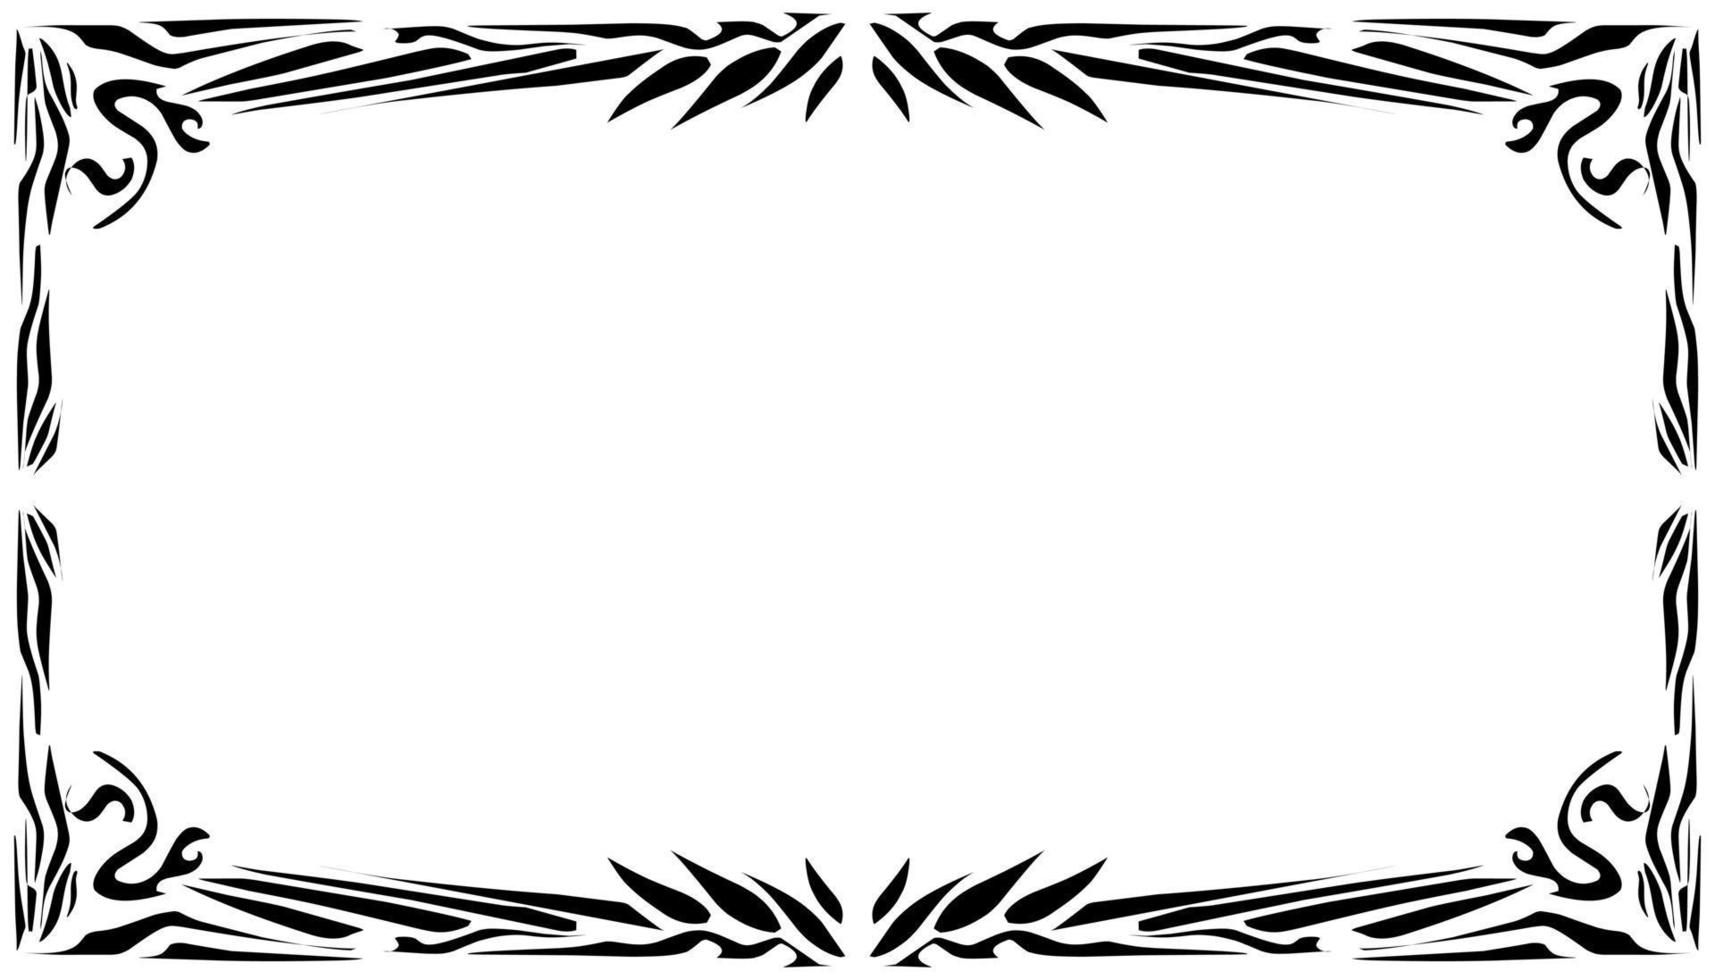 Illustration of a photo frame with a tribal design vector